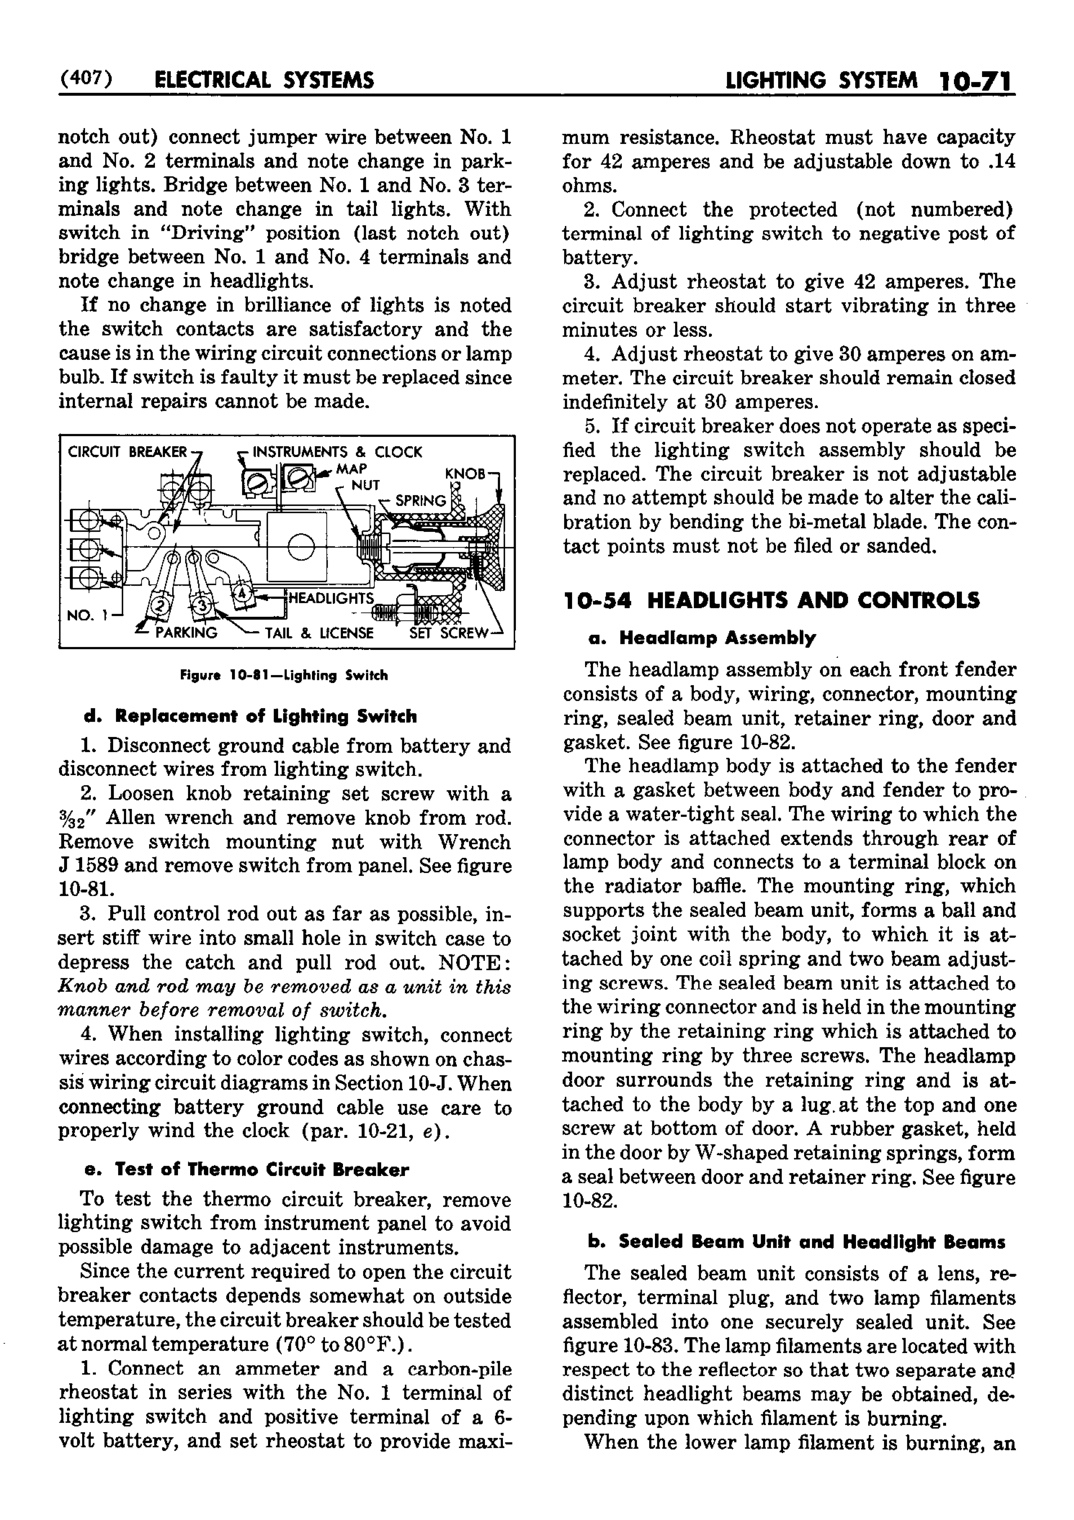 n_11 1952 Buick Shop Manual - Electrical Systems-071-071.jpg